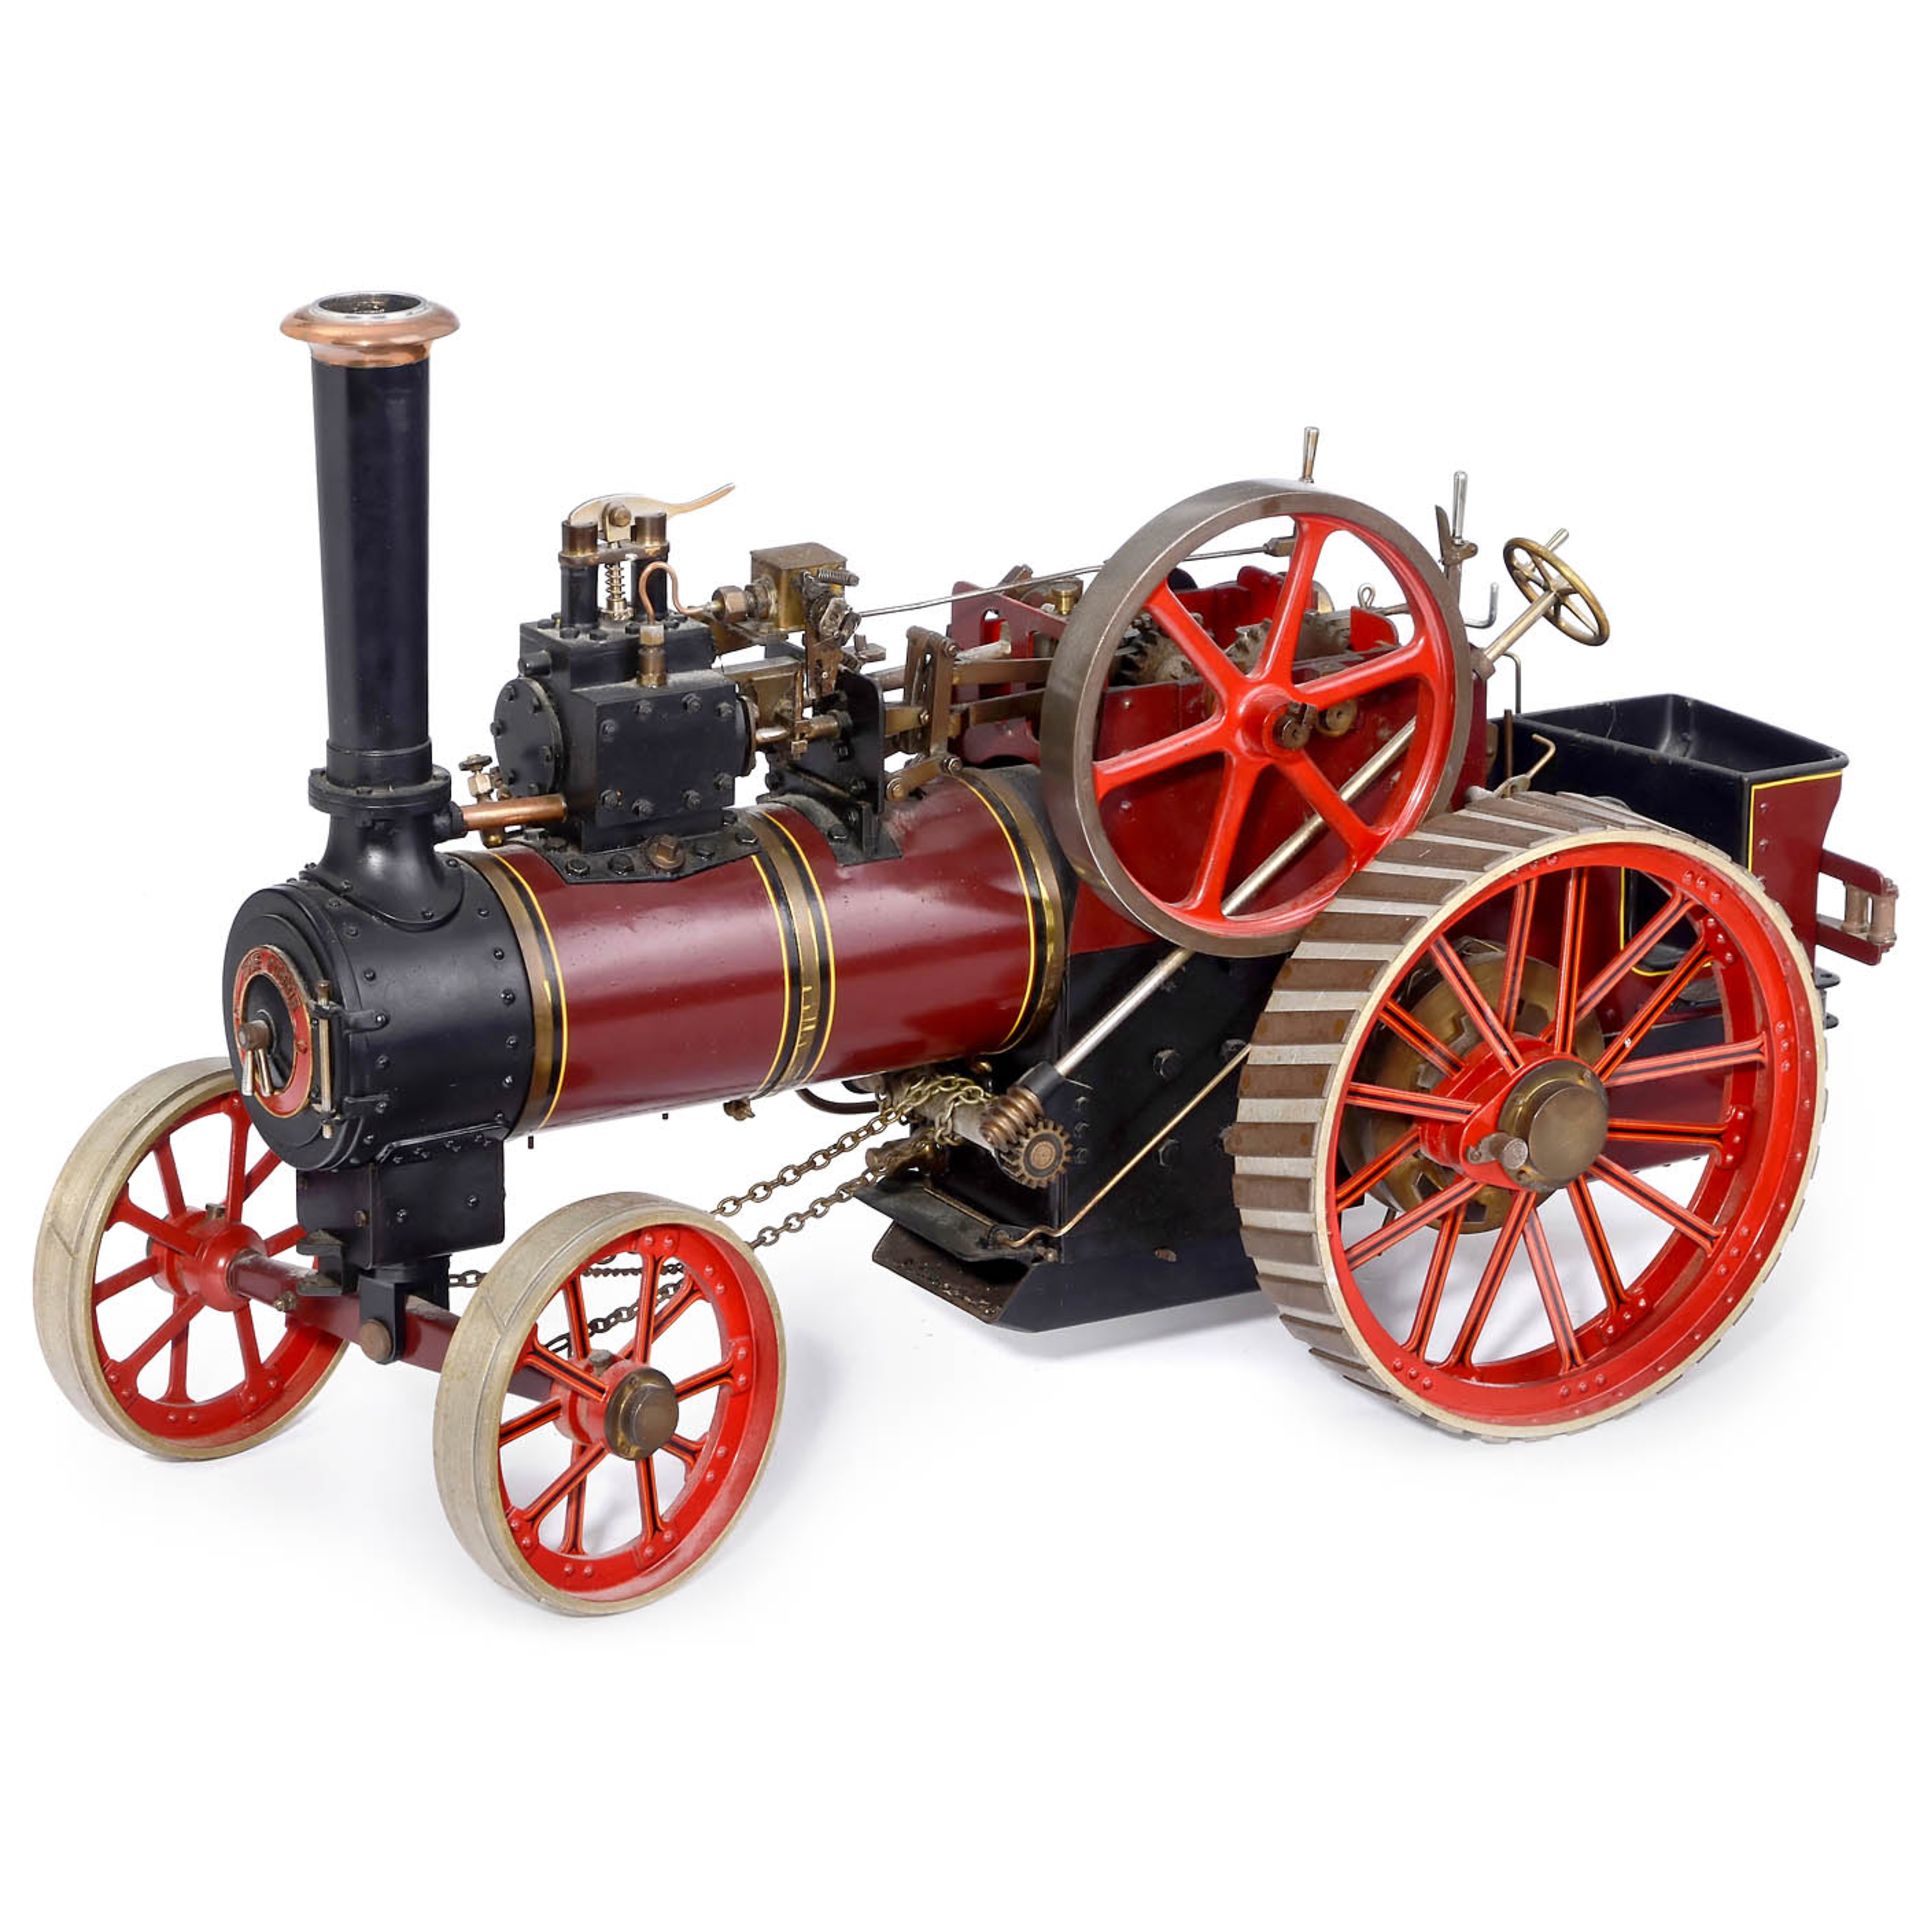 1-Inch Scale Model of a Live-Steam Traction Engine, c. 1980 - Bild 2 aus 5